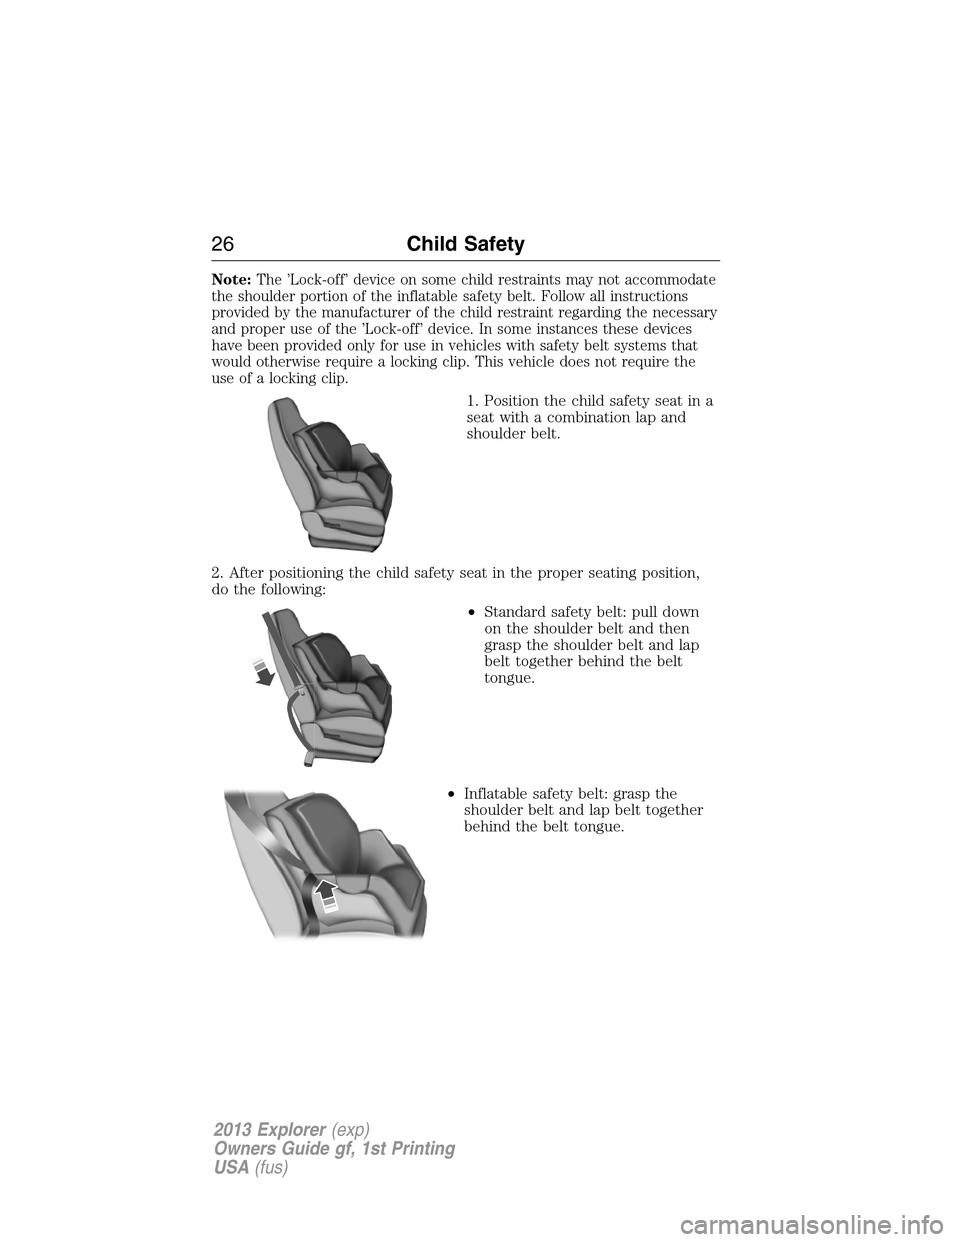 FORD EXPLORER 2013 5.G Owners Manual Note:The ’Lock-off’ device on some child restraints may not accommodate
the shoulder portion of the inflatable safety belt. Follow all instructions
provided by the manufacturer of the child restra